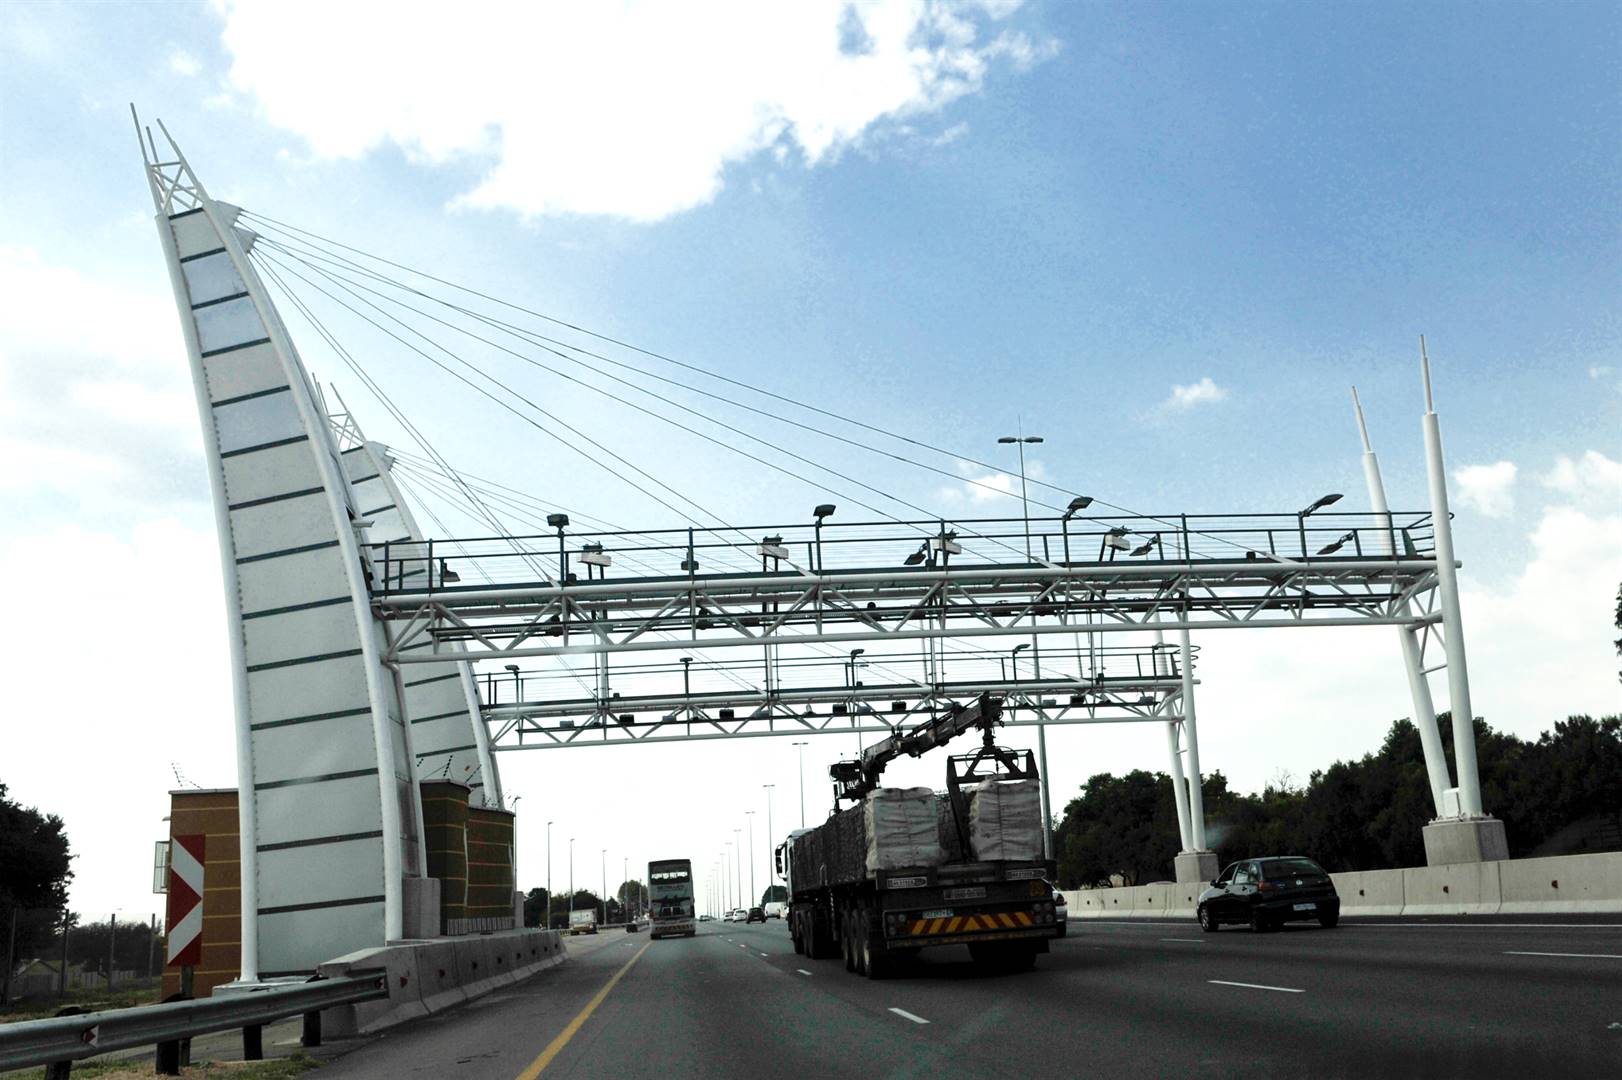 Lesufi expressed his relief “at the finalisation of the e-toll matter”, which has been a thorn in the Gauteng government. Photo: Rapport